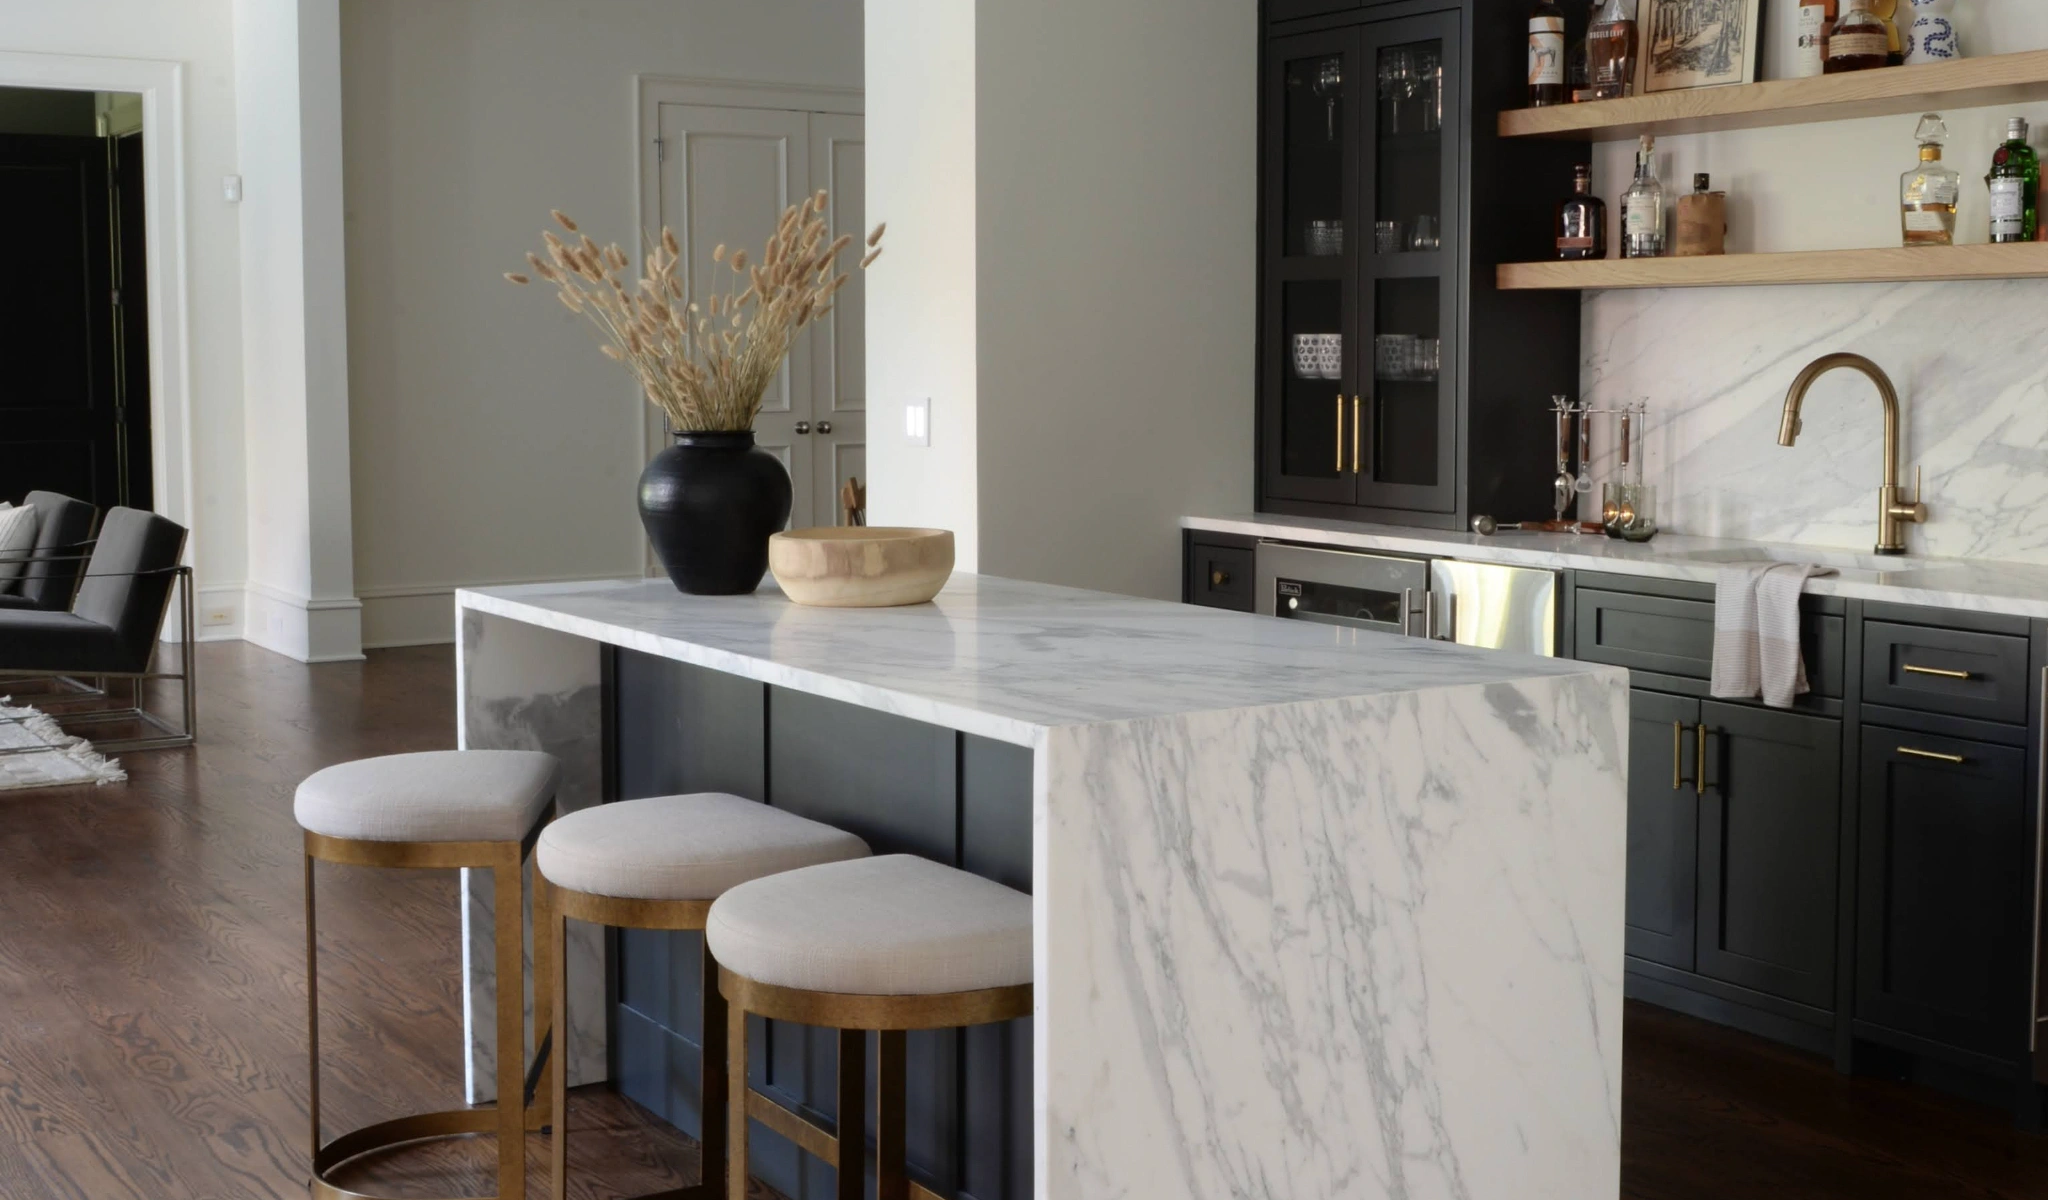 A kitchen with a marble counter top and bar stools.